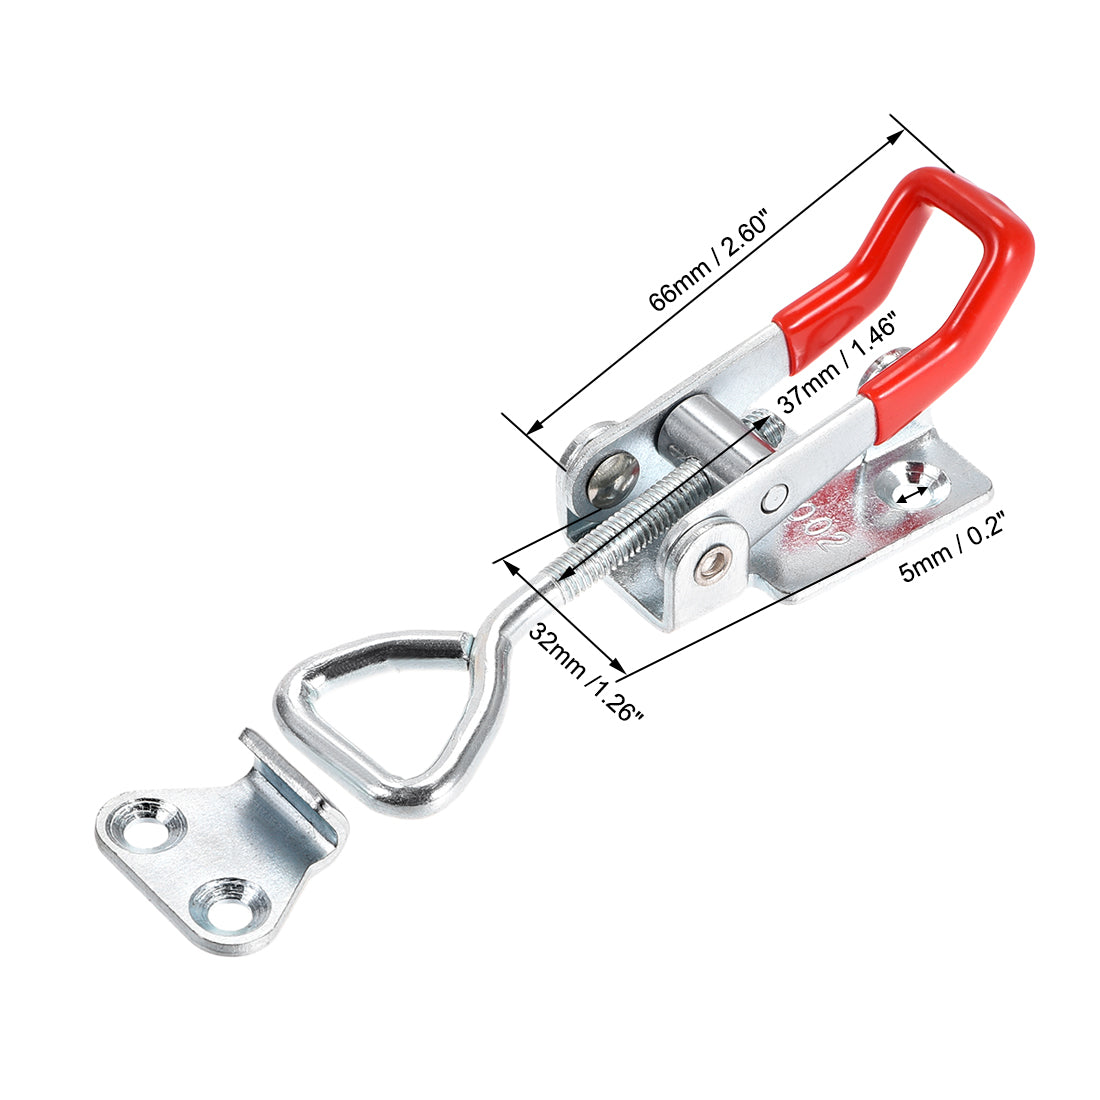 uxcell Uxcell 396lbs Holding Capacity Iron Pull-Action Latch Adjustable Toggle Clamp